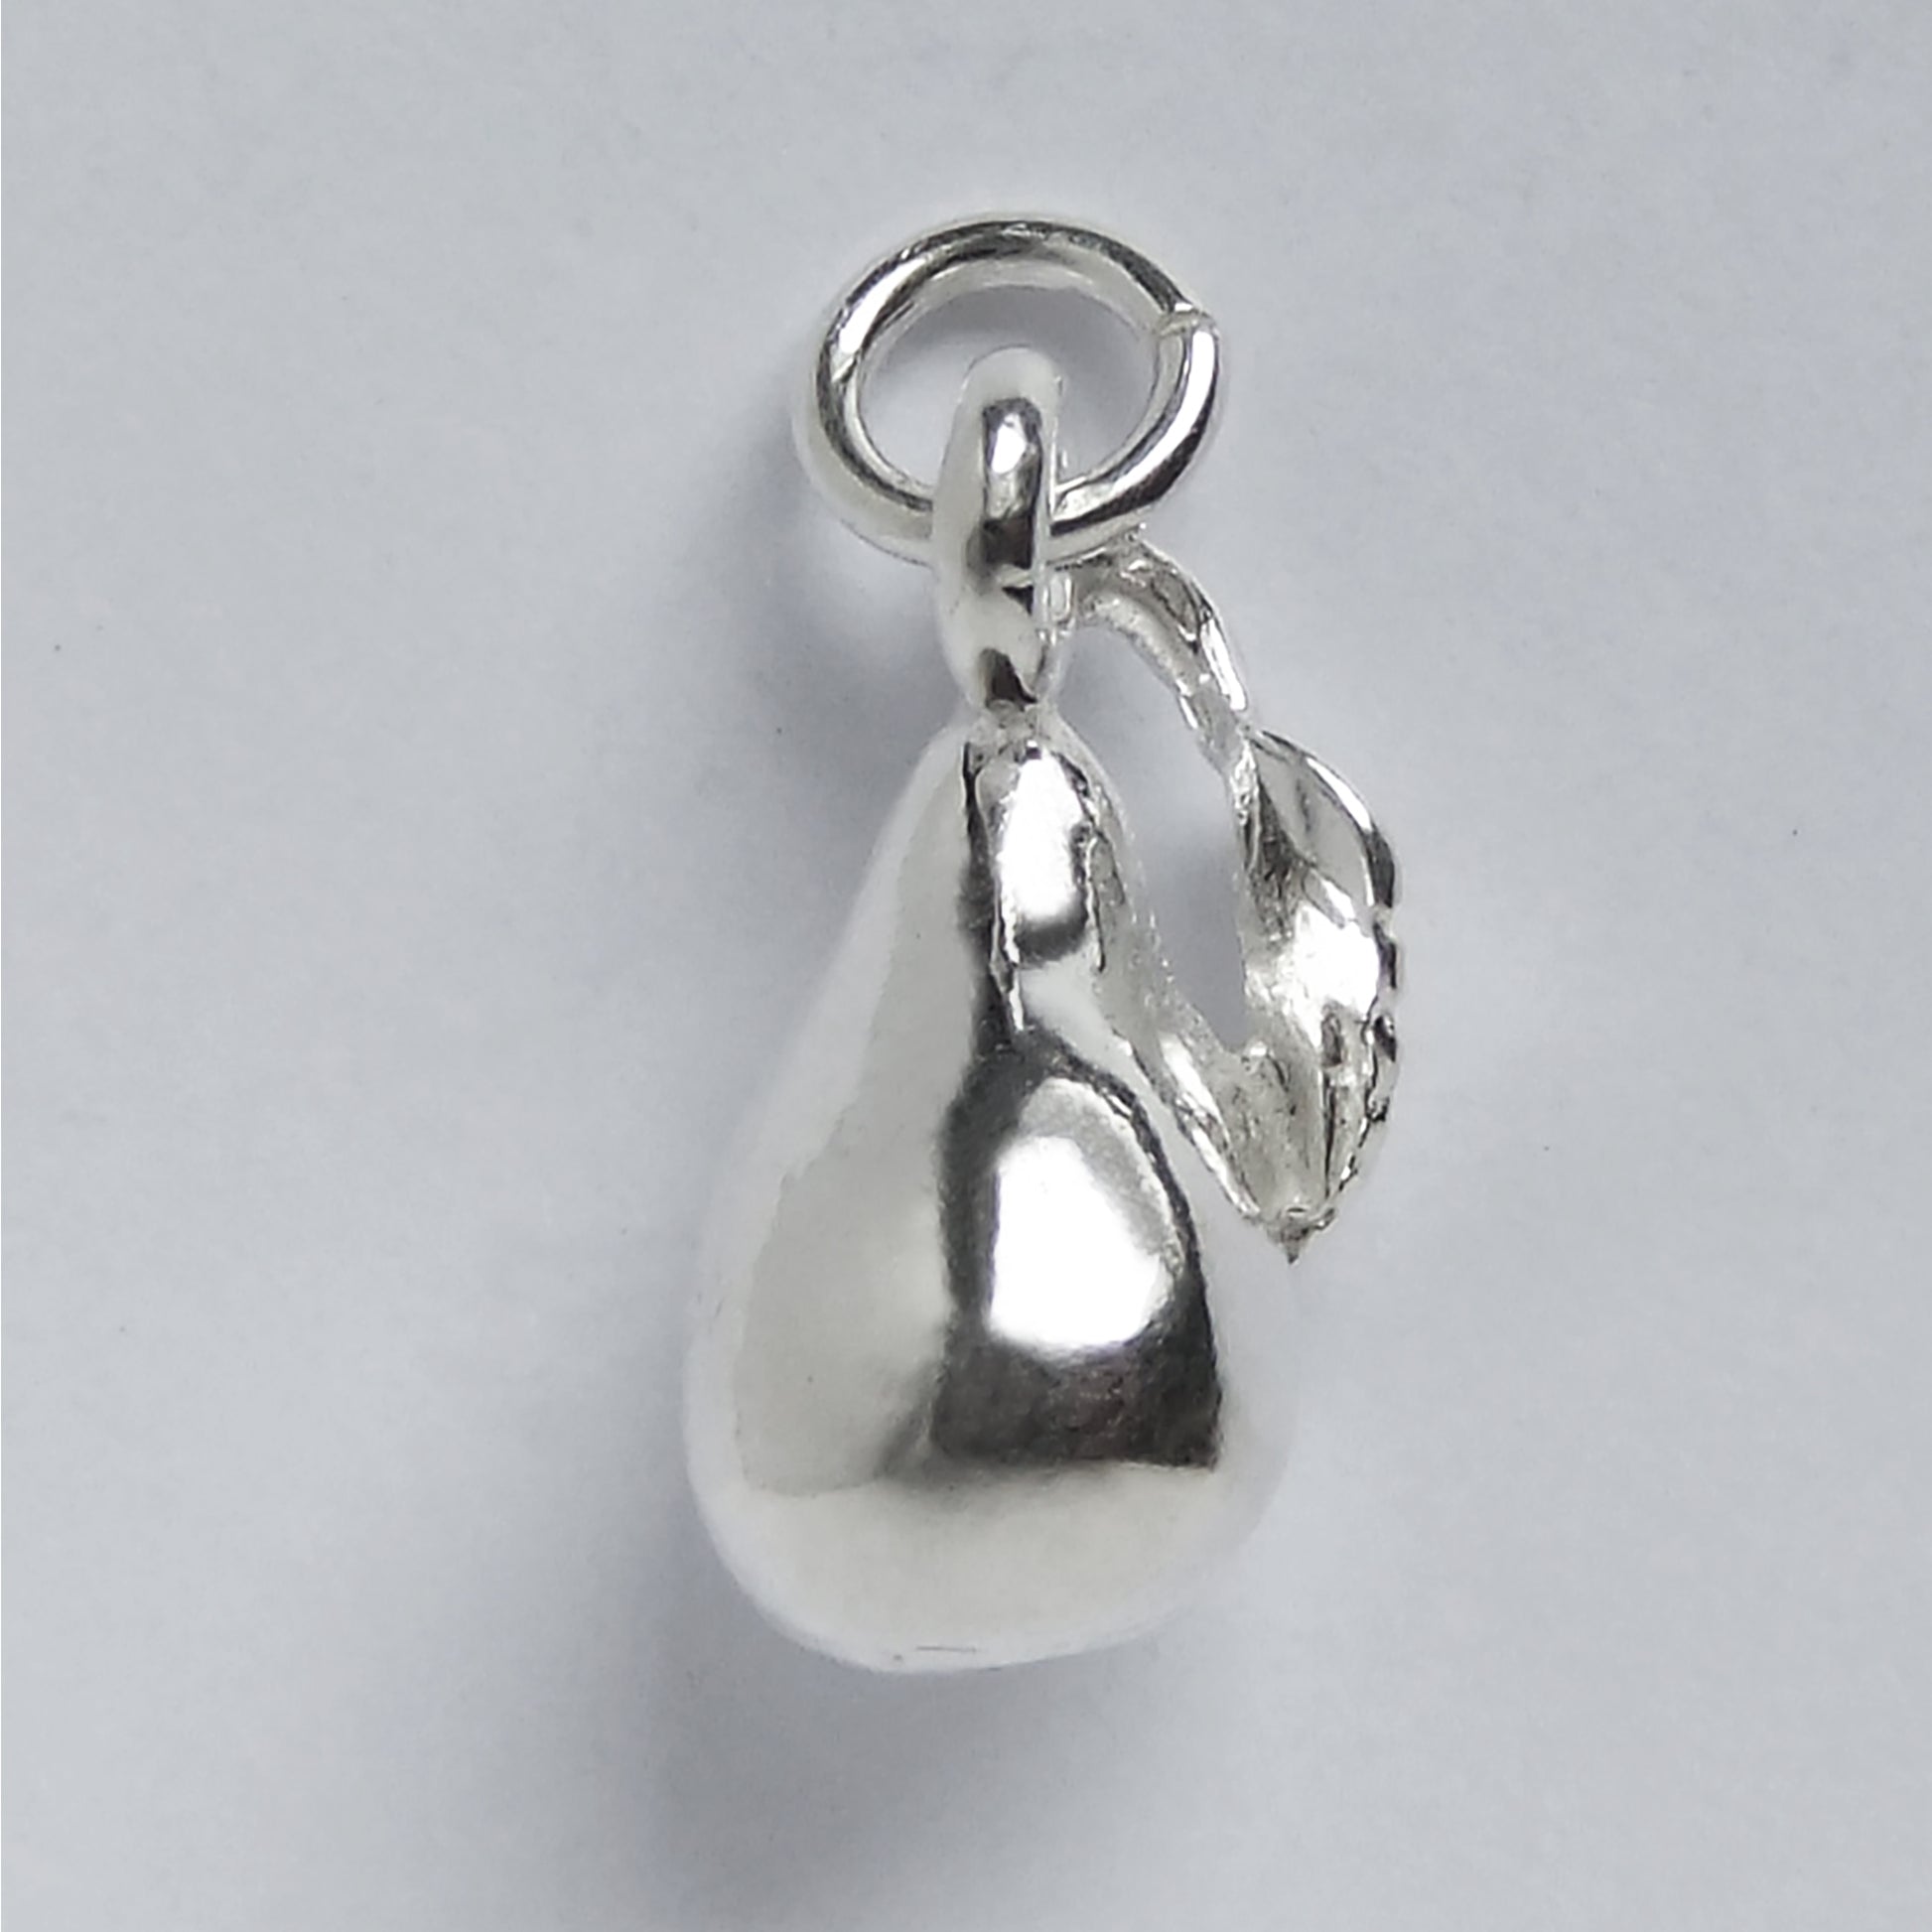 Pear Charm Sterling Silver 925 Fruit Pendant from Charmarama